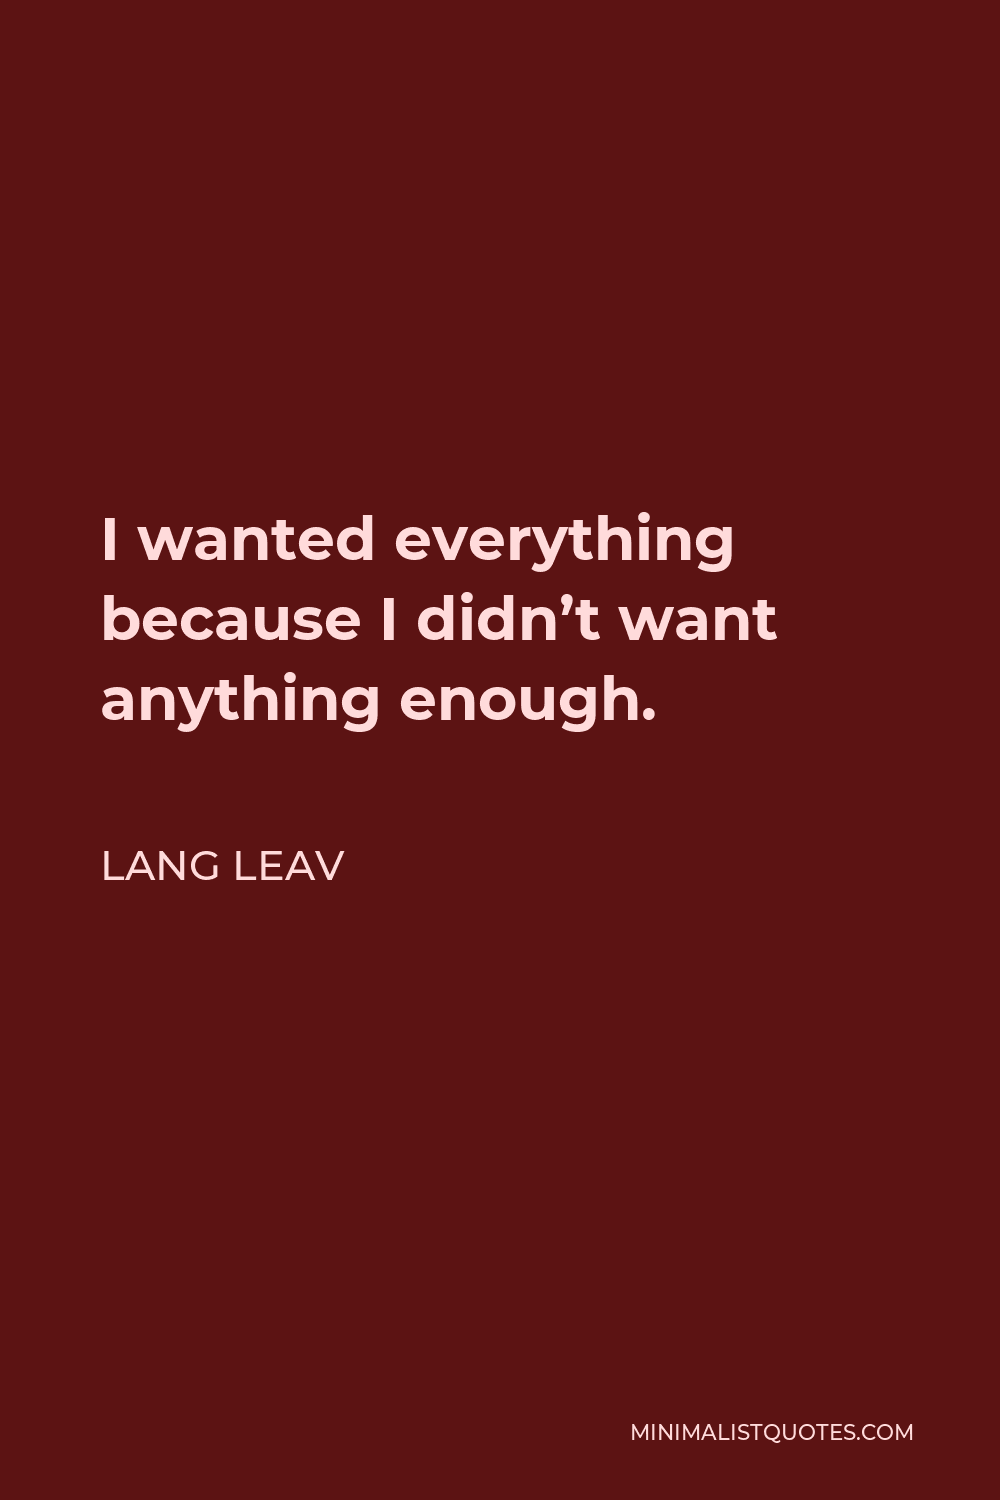 Lang Leav Quote - I wanted everything because I didn’t want anything enough.